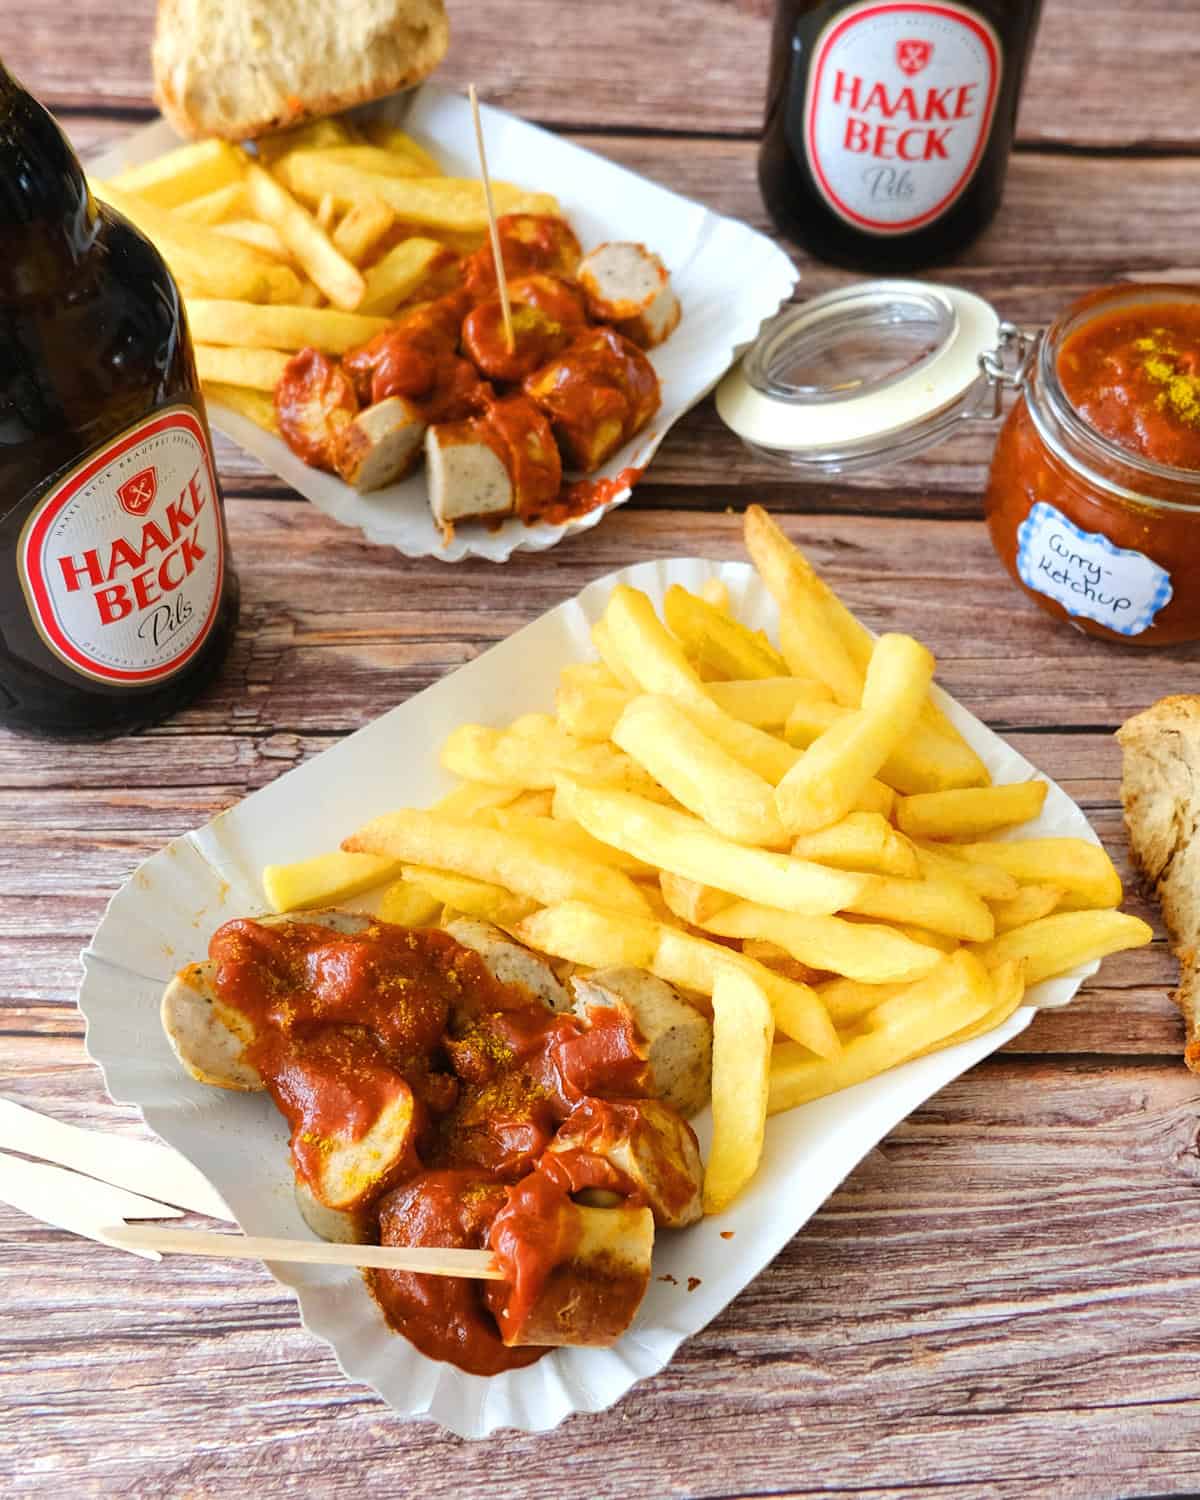 Beer and currywurst with fries and homemade currywurst sauce